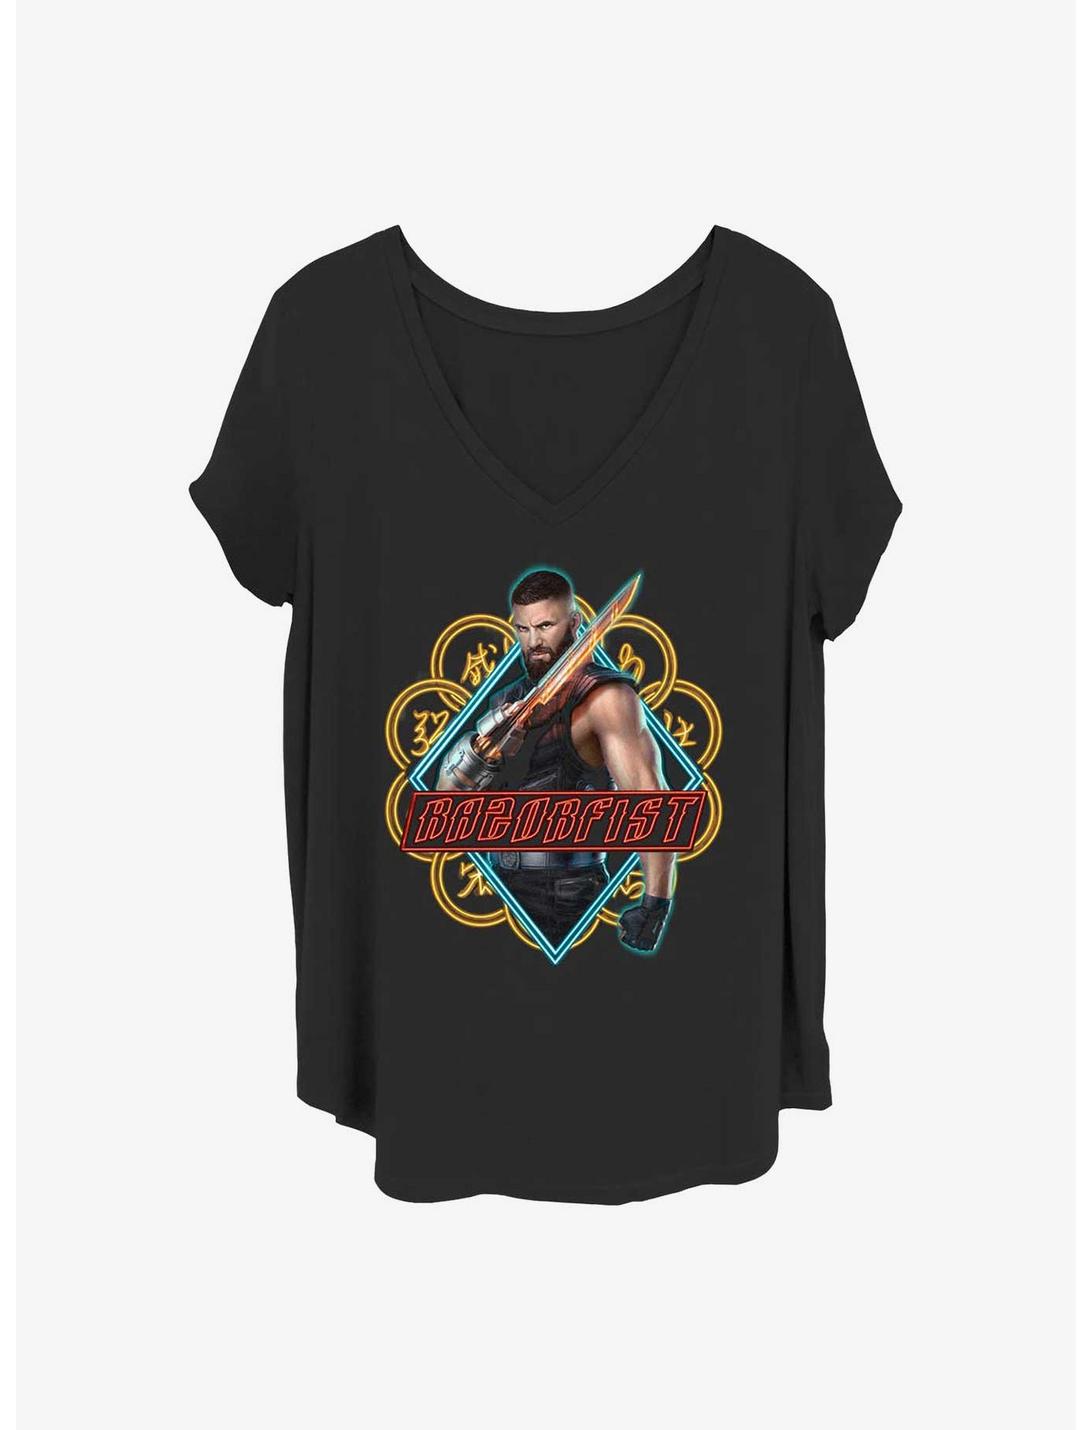 Marvel Shang-Chi and the Legend of the Ten Rings Razorfist Girls T-Shirt Plus Size, BLACK, hi-res